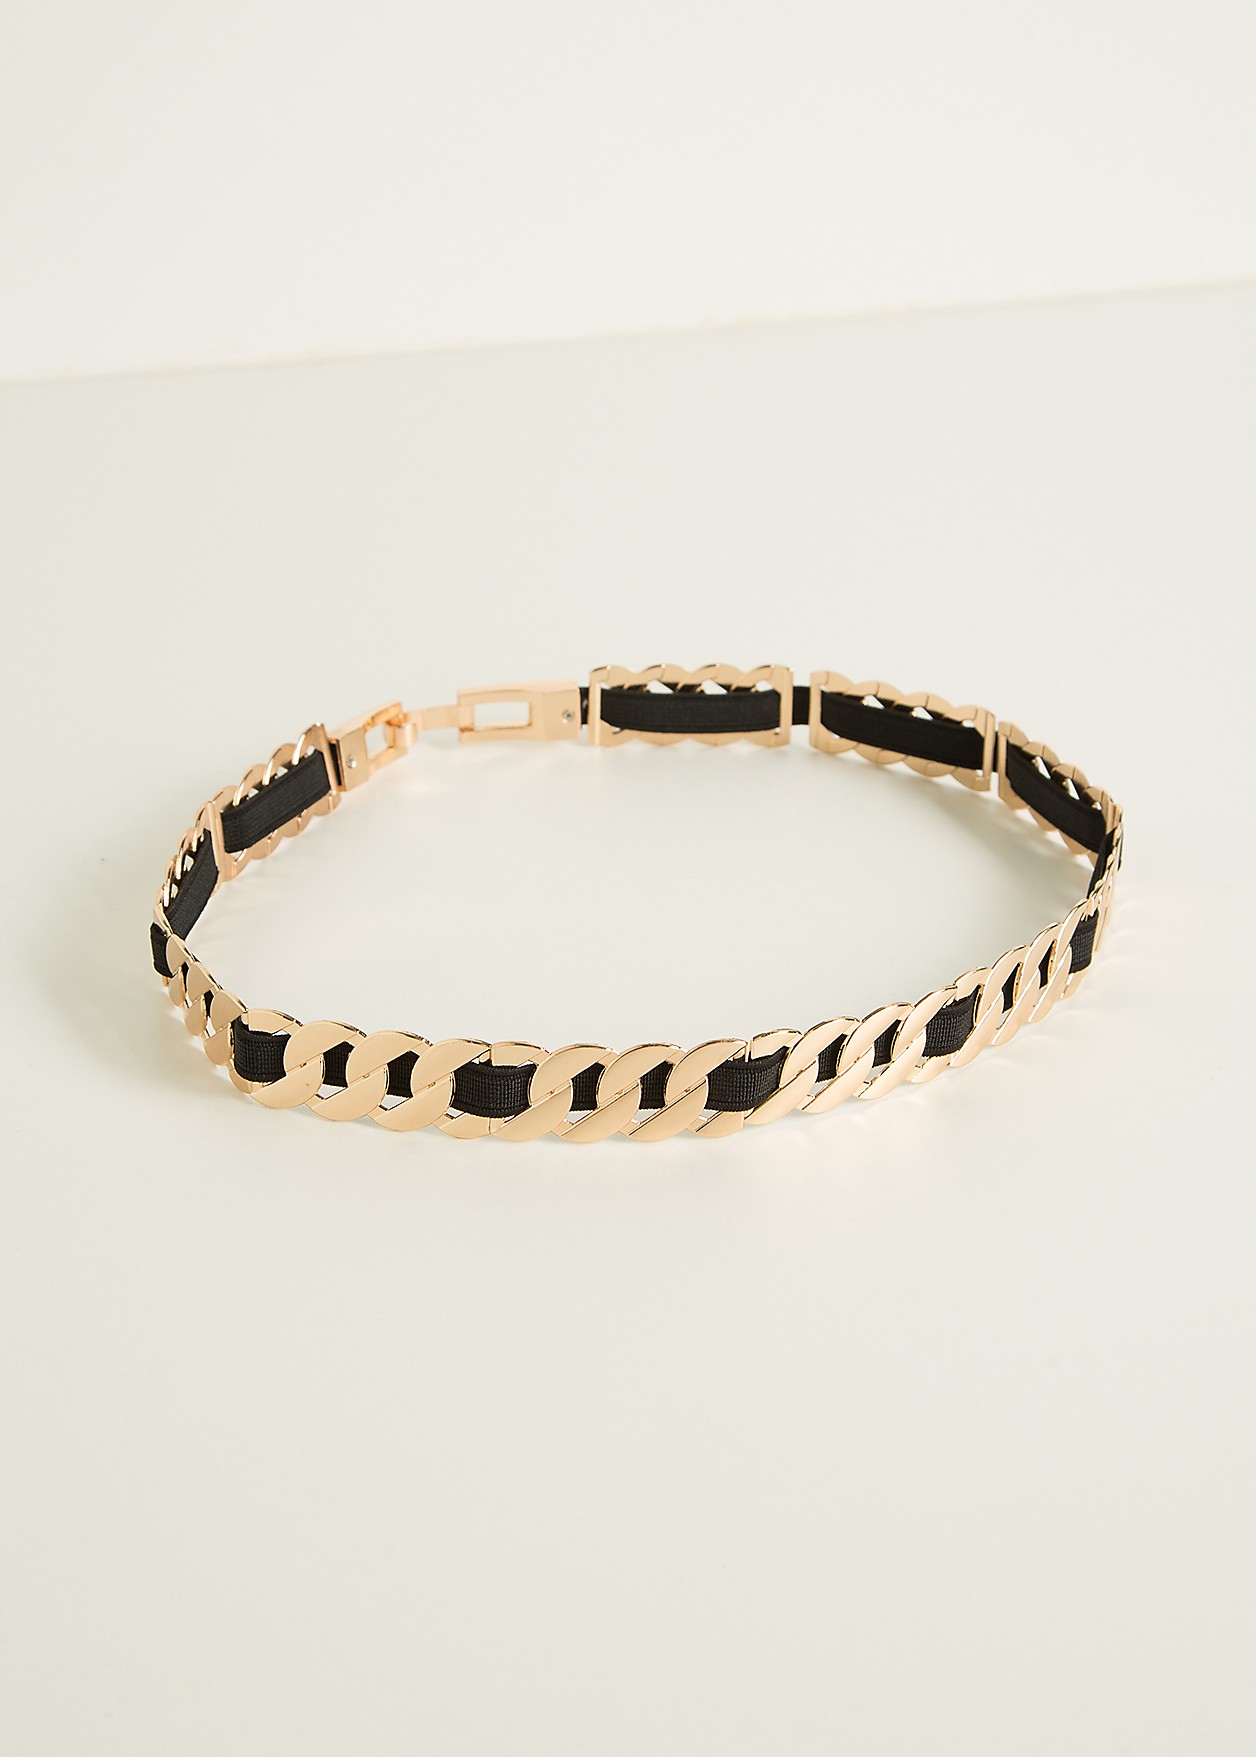 Elastic belt with metal chain details